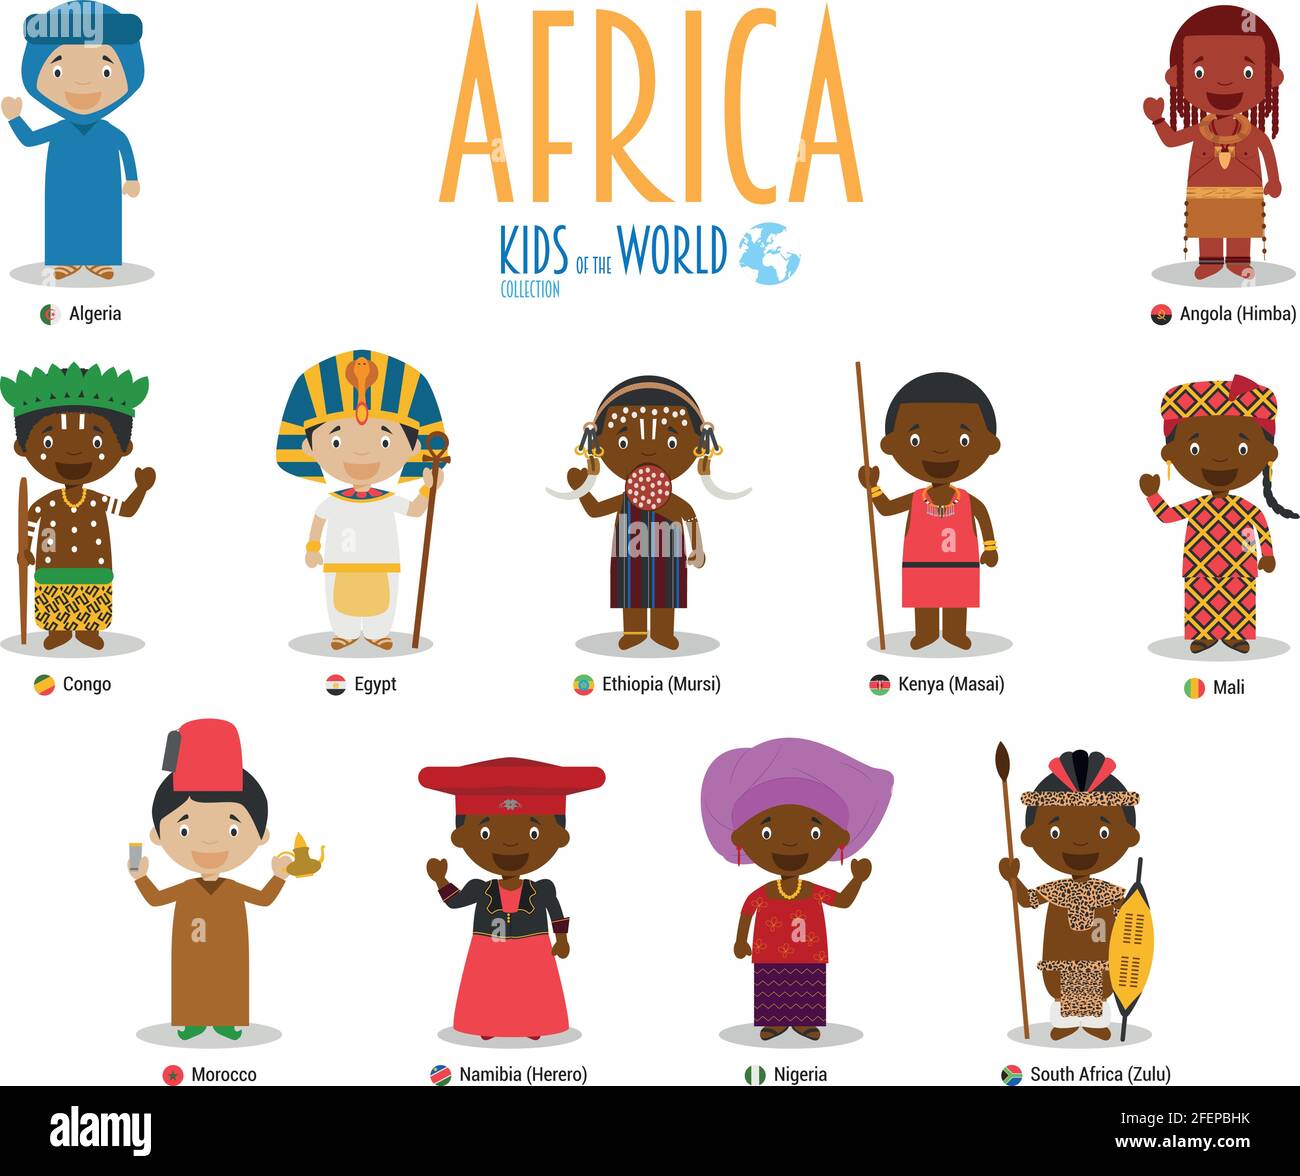 Kids and nationalities of the world vector: Africa. Set of 11 characters dressed in different national costumes. Stock Vector